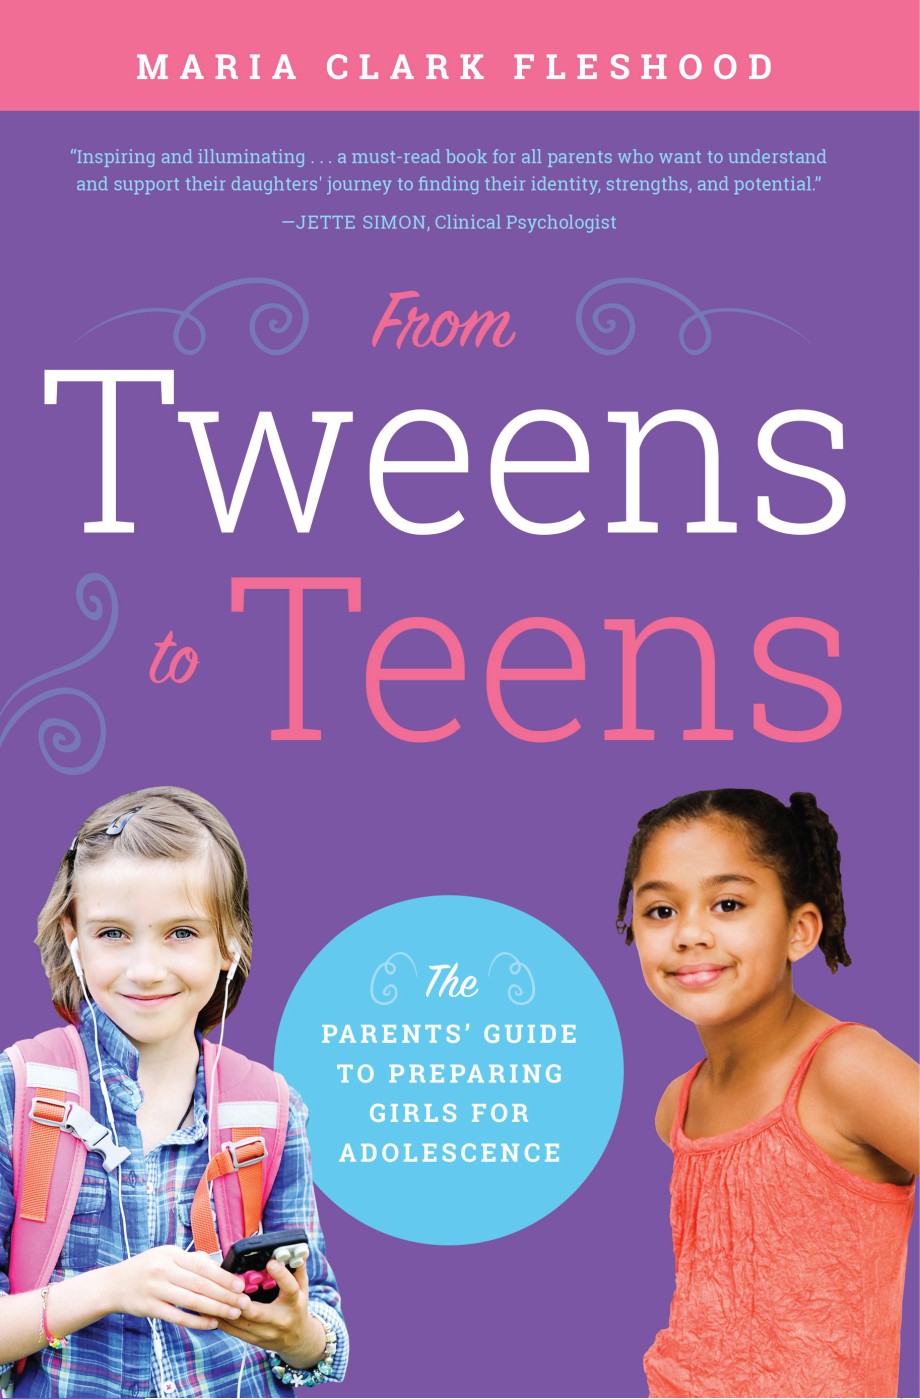 From Tweens to Teens The Parents' Guide to Preparing Girls for Adolescence